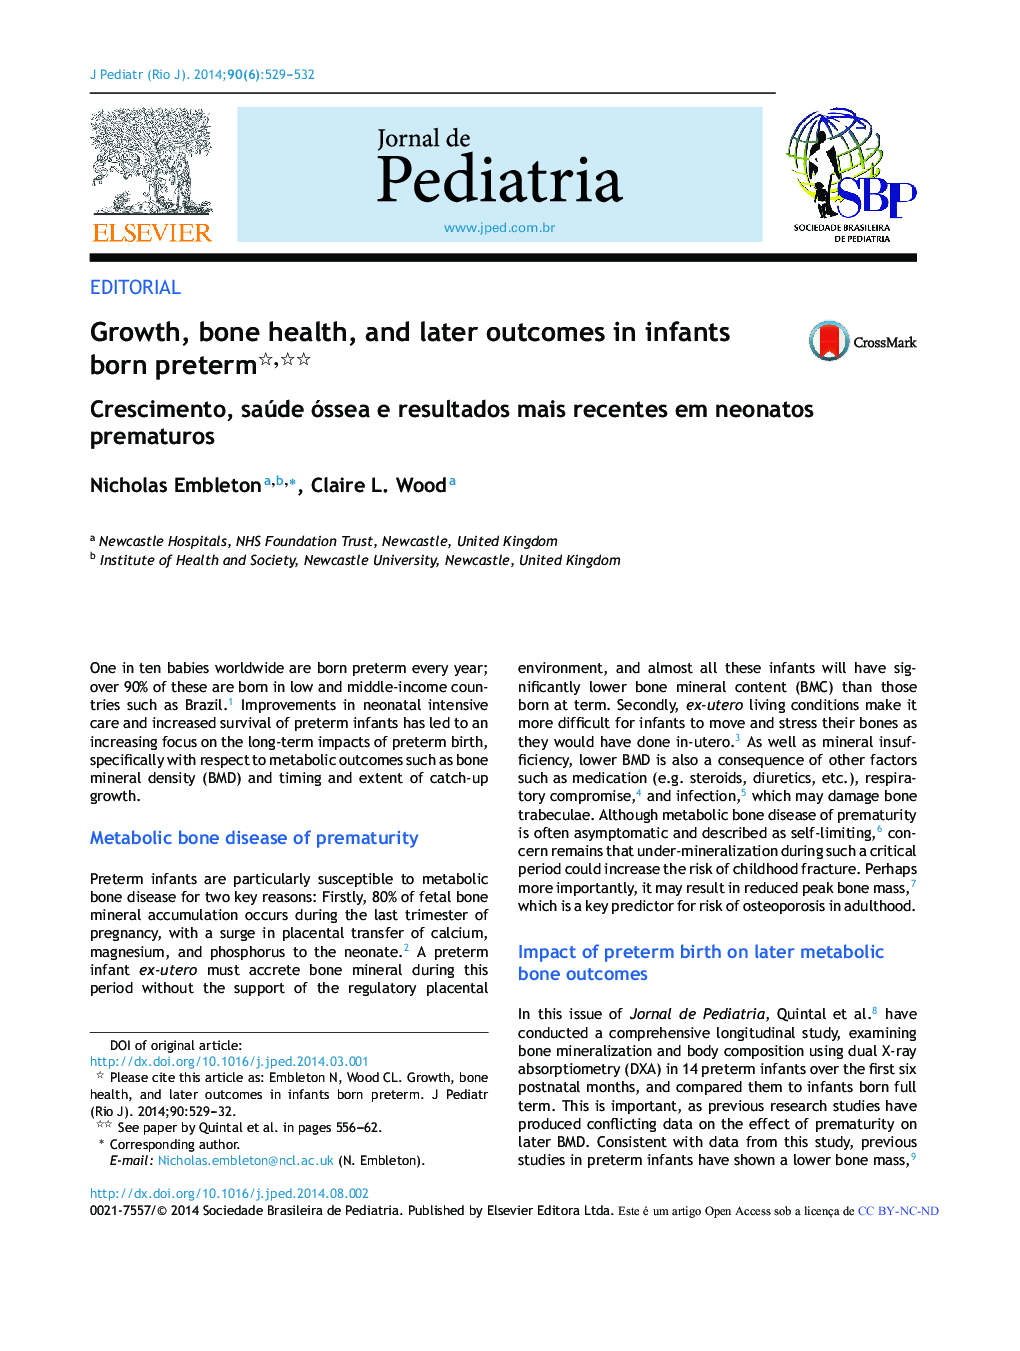 Growth, bone health, and later outcomes in infants born preterm